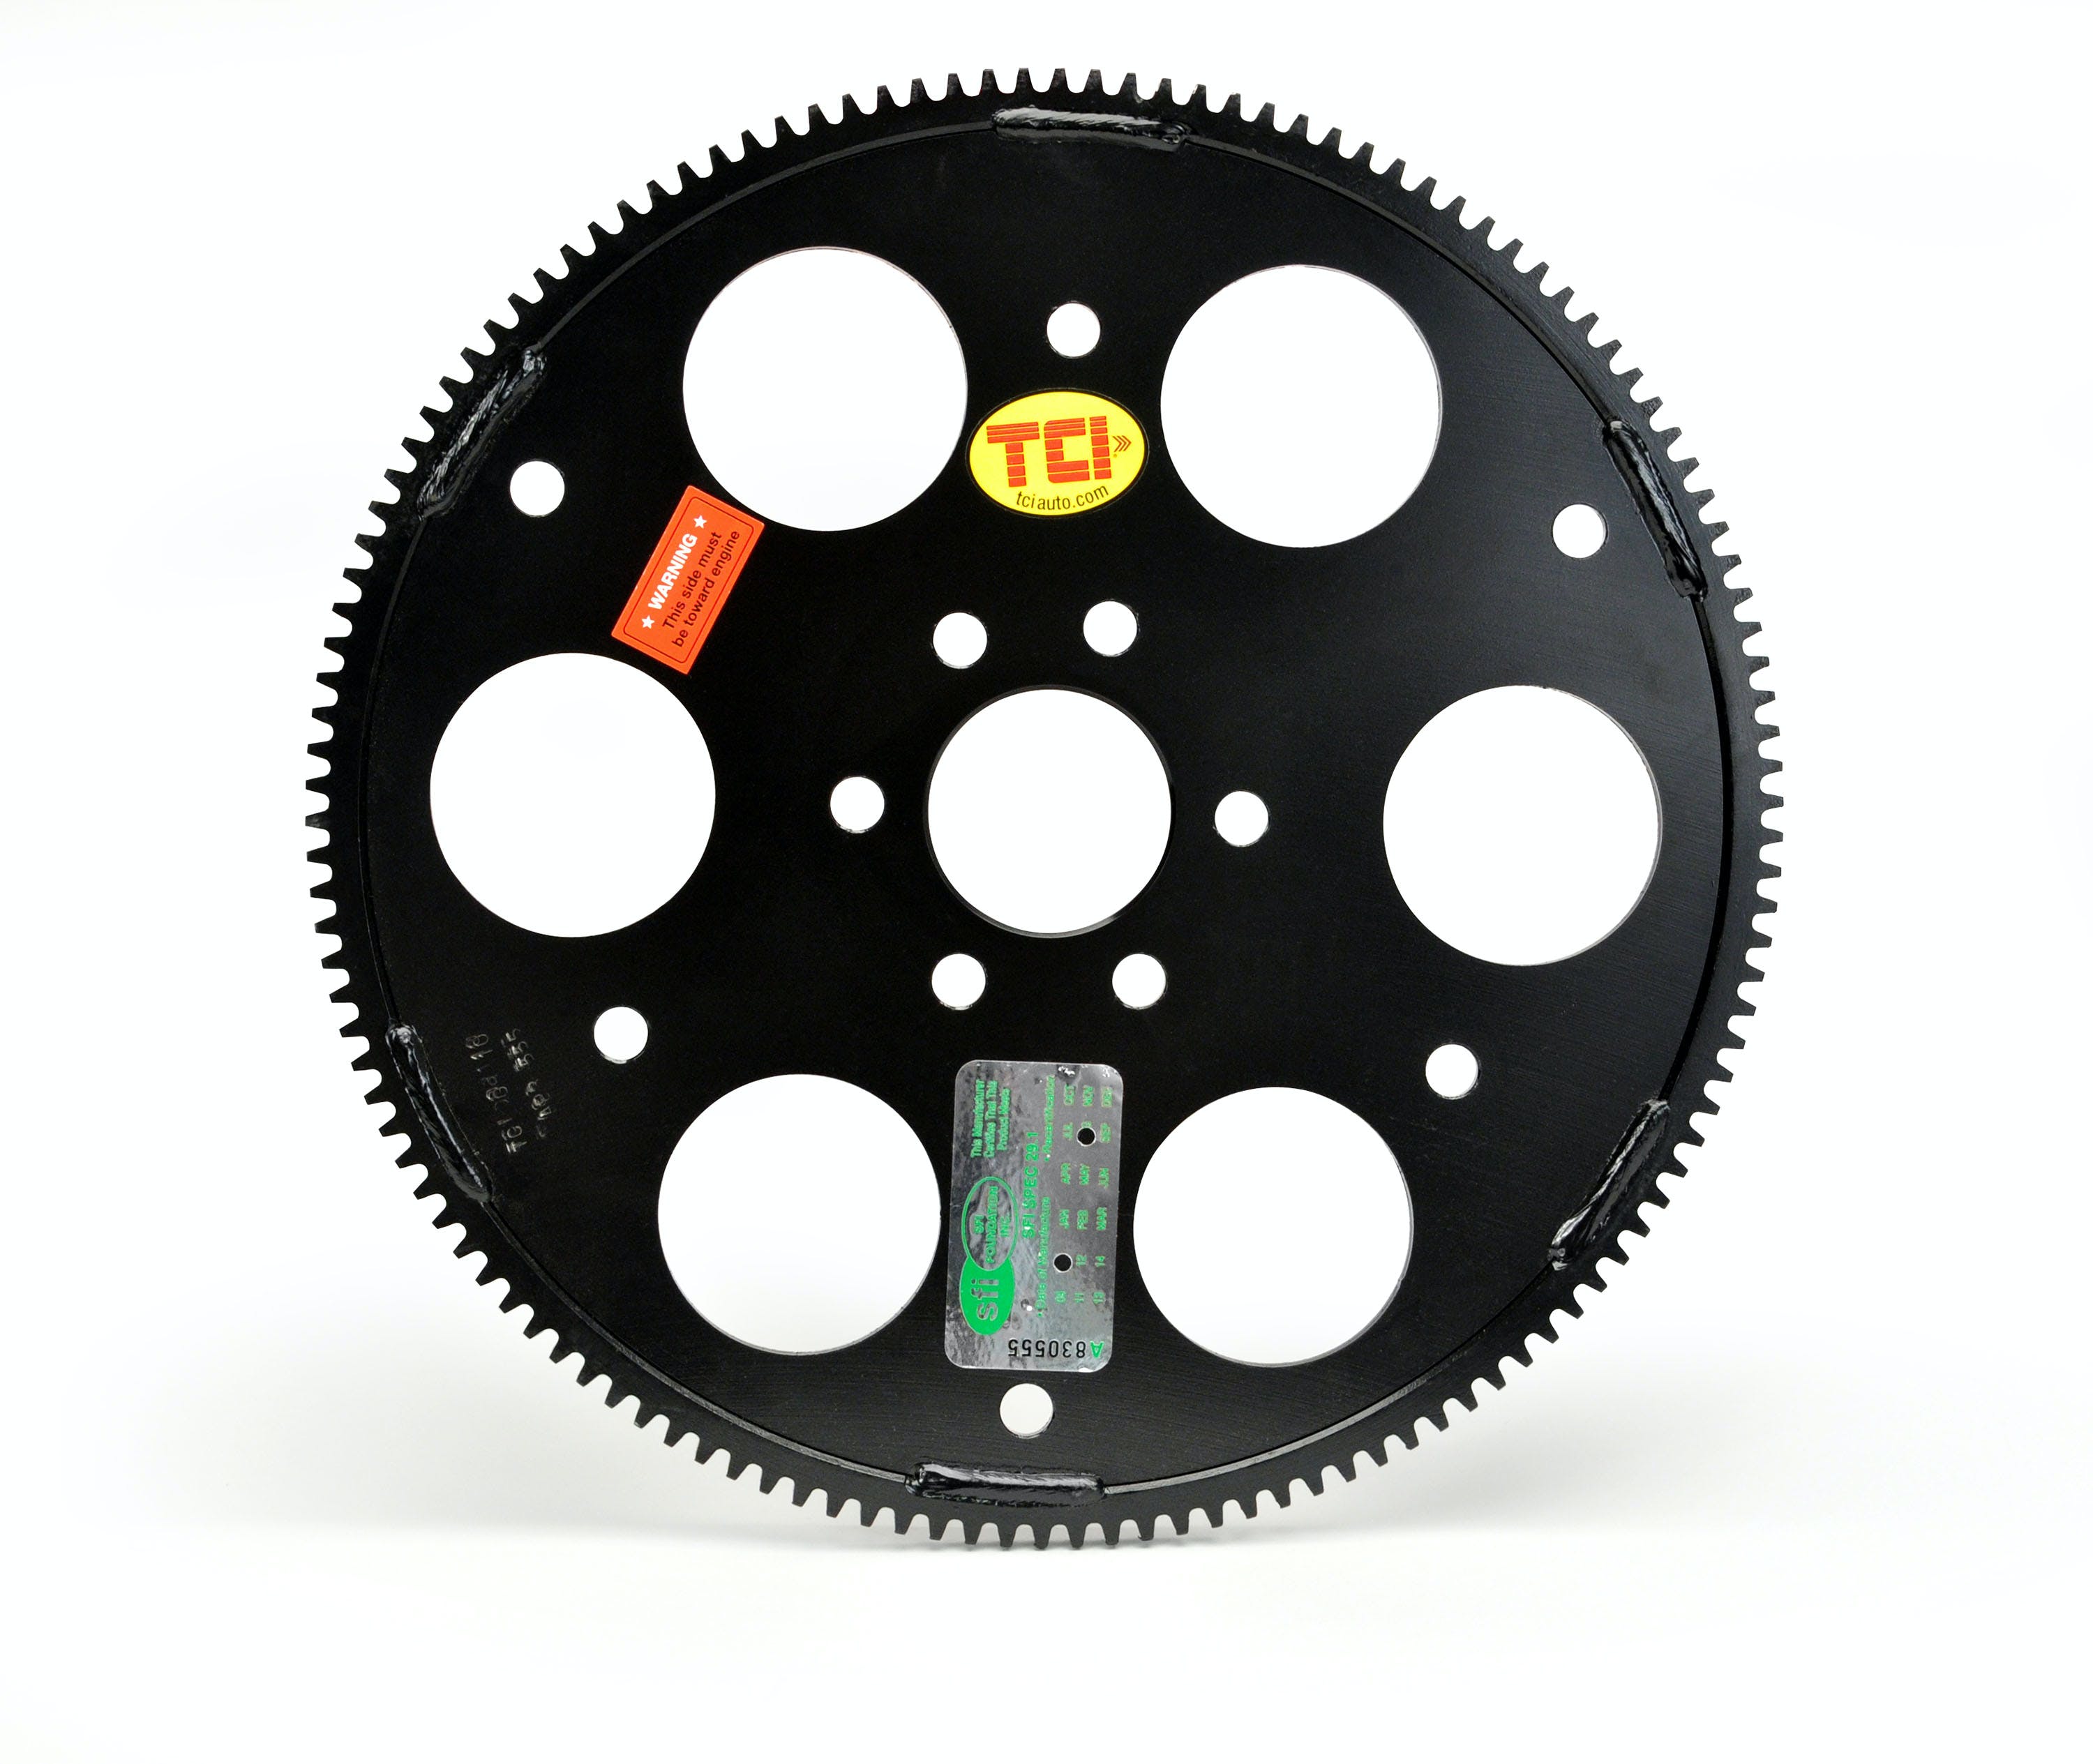 TCI Automotive 149162 Flexplate for Mopar engines and GM Trans Small GM Pattern 6-Hole Crank